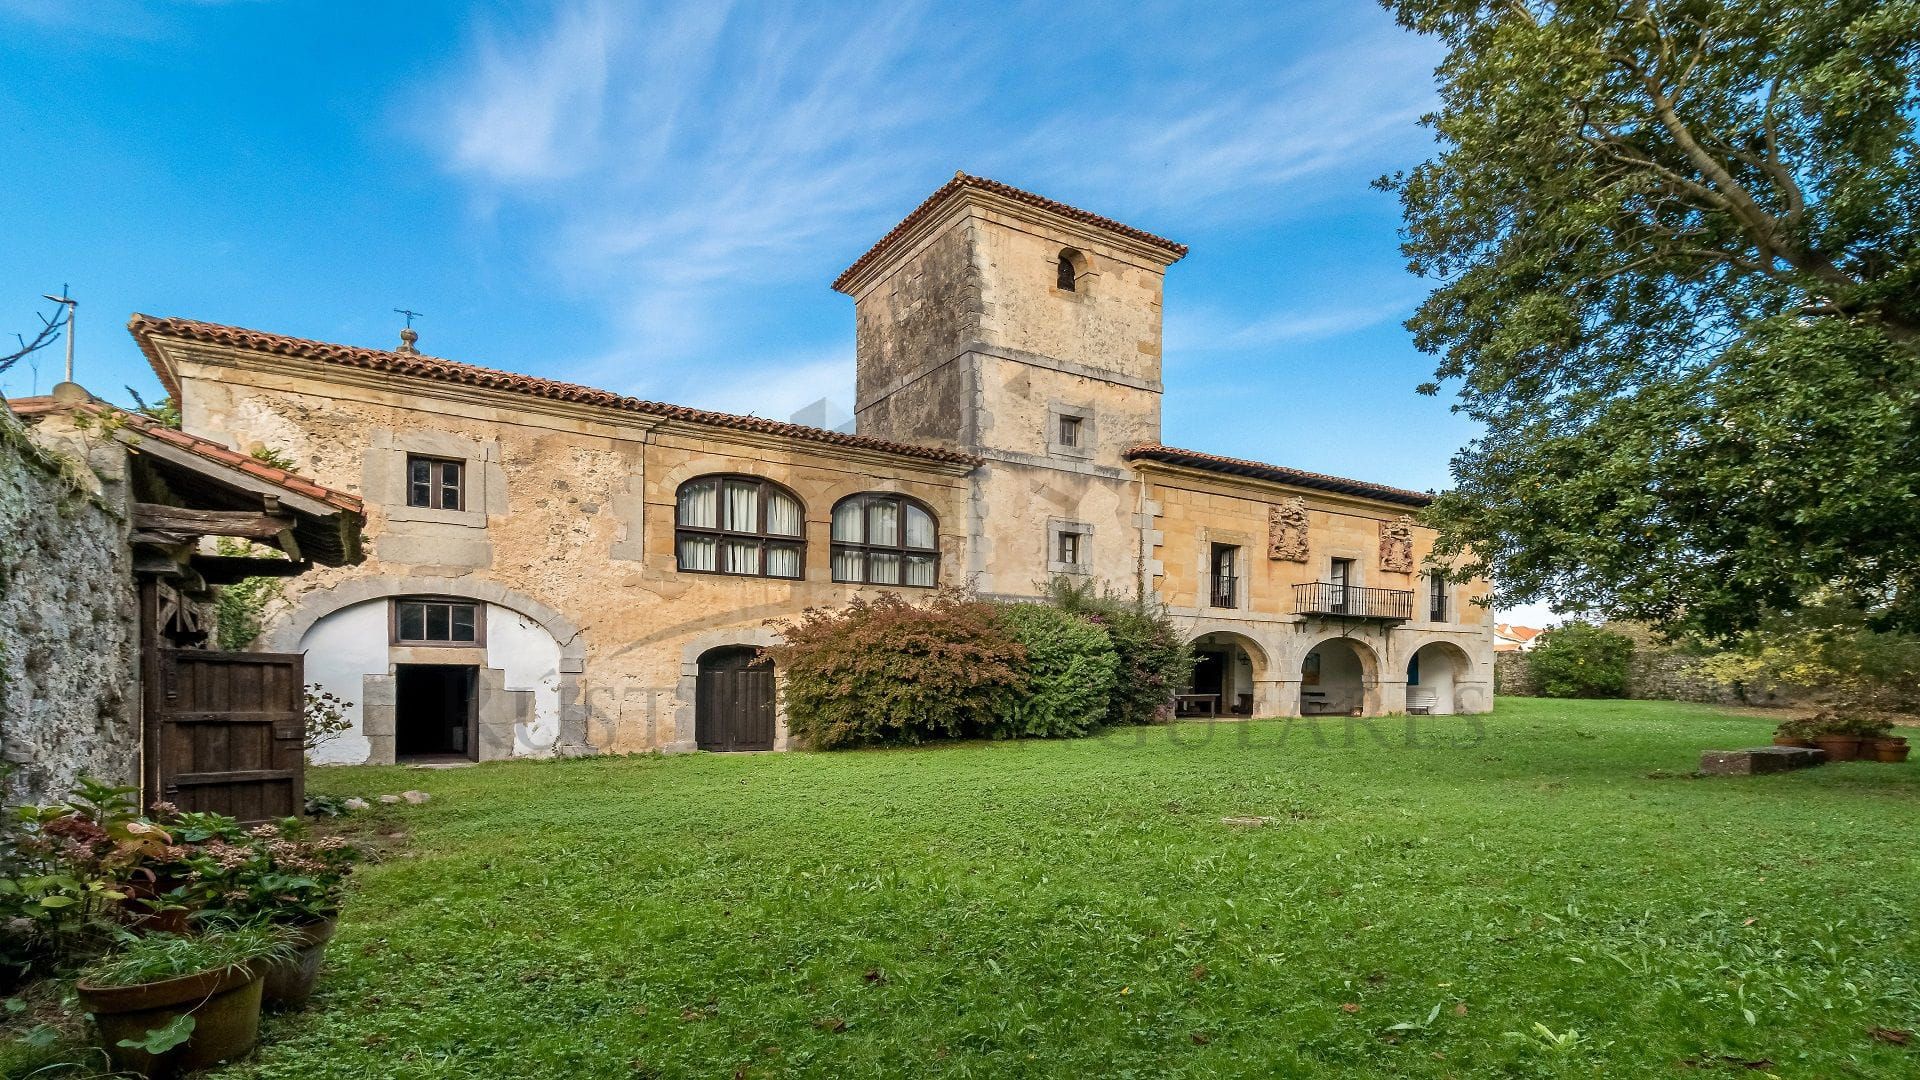 NEXT TO THE CANTABRIAN, A PALACE FULL OF INSPIRATION